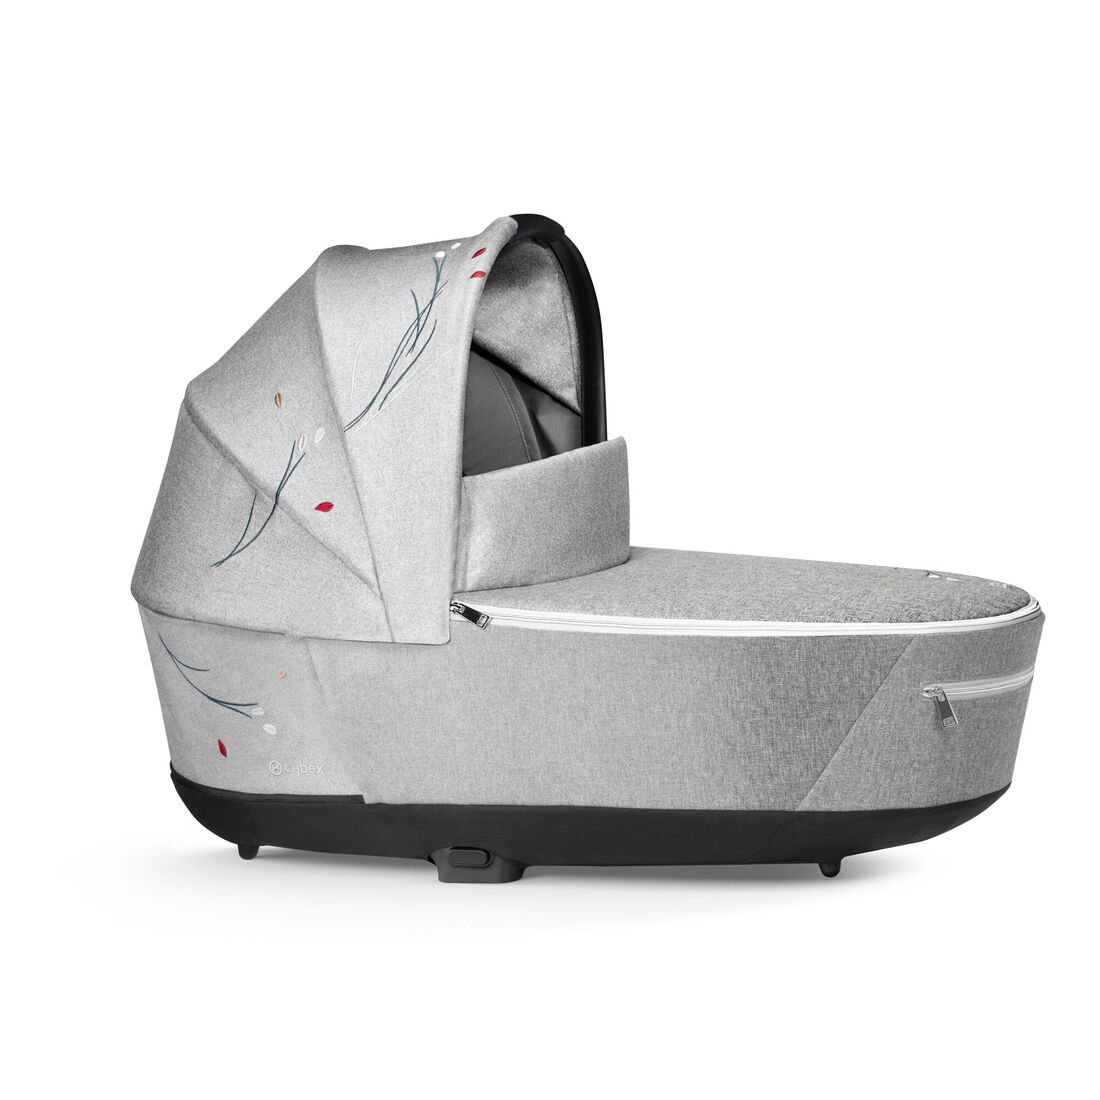 CYBEX Priam Lux Carry Cot - Koi in Koi large